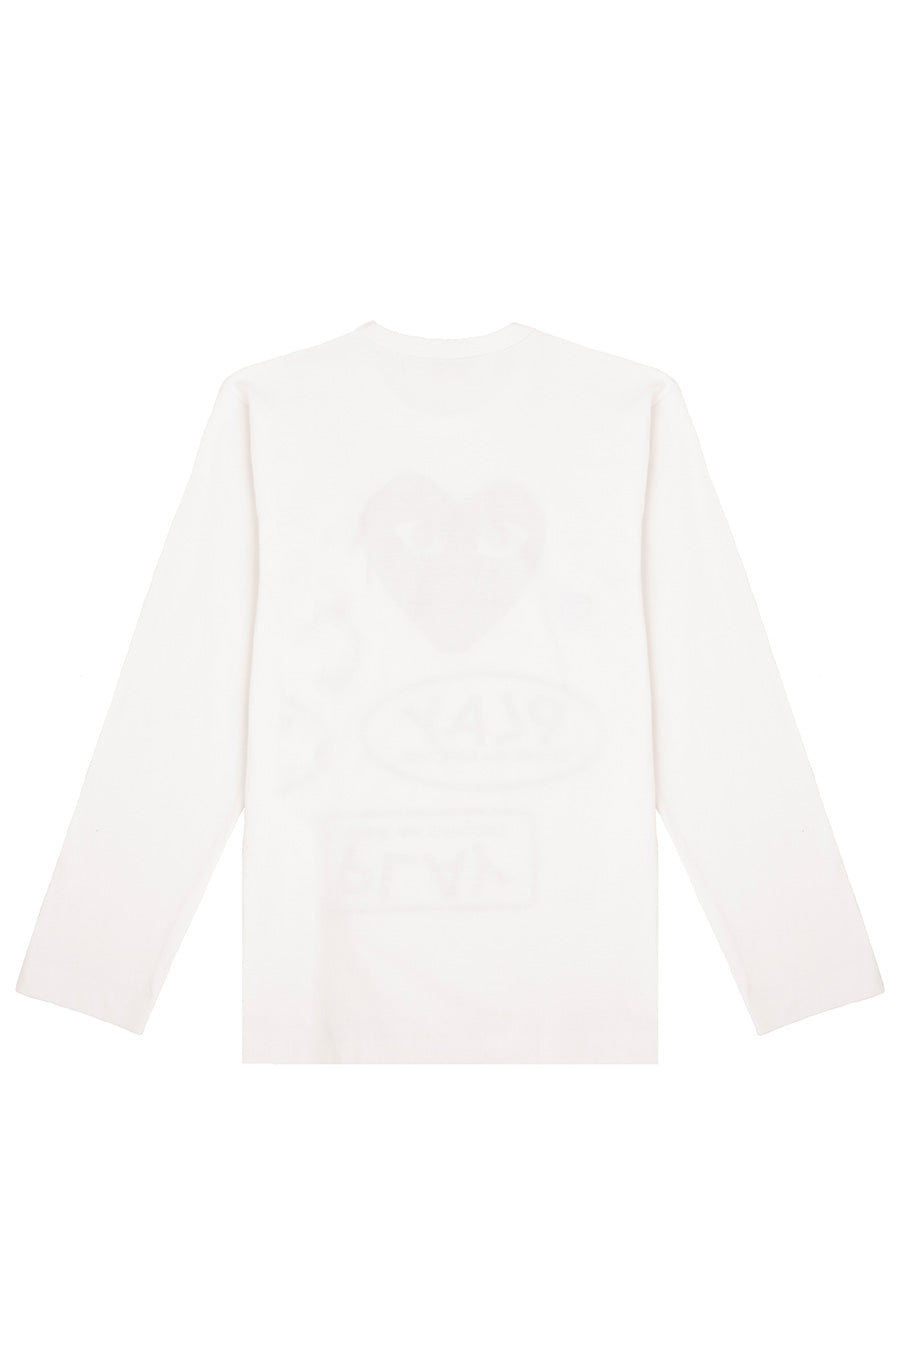 Comme des Garçons PLAY - White All Over Print Long Sleeve T-Shirt | 1032 SPACE